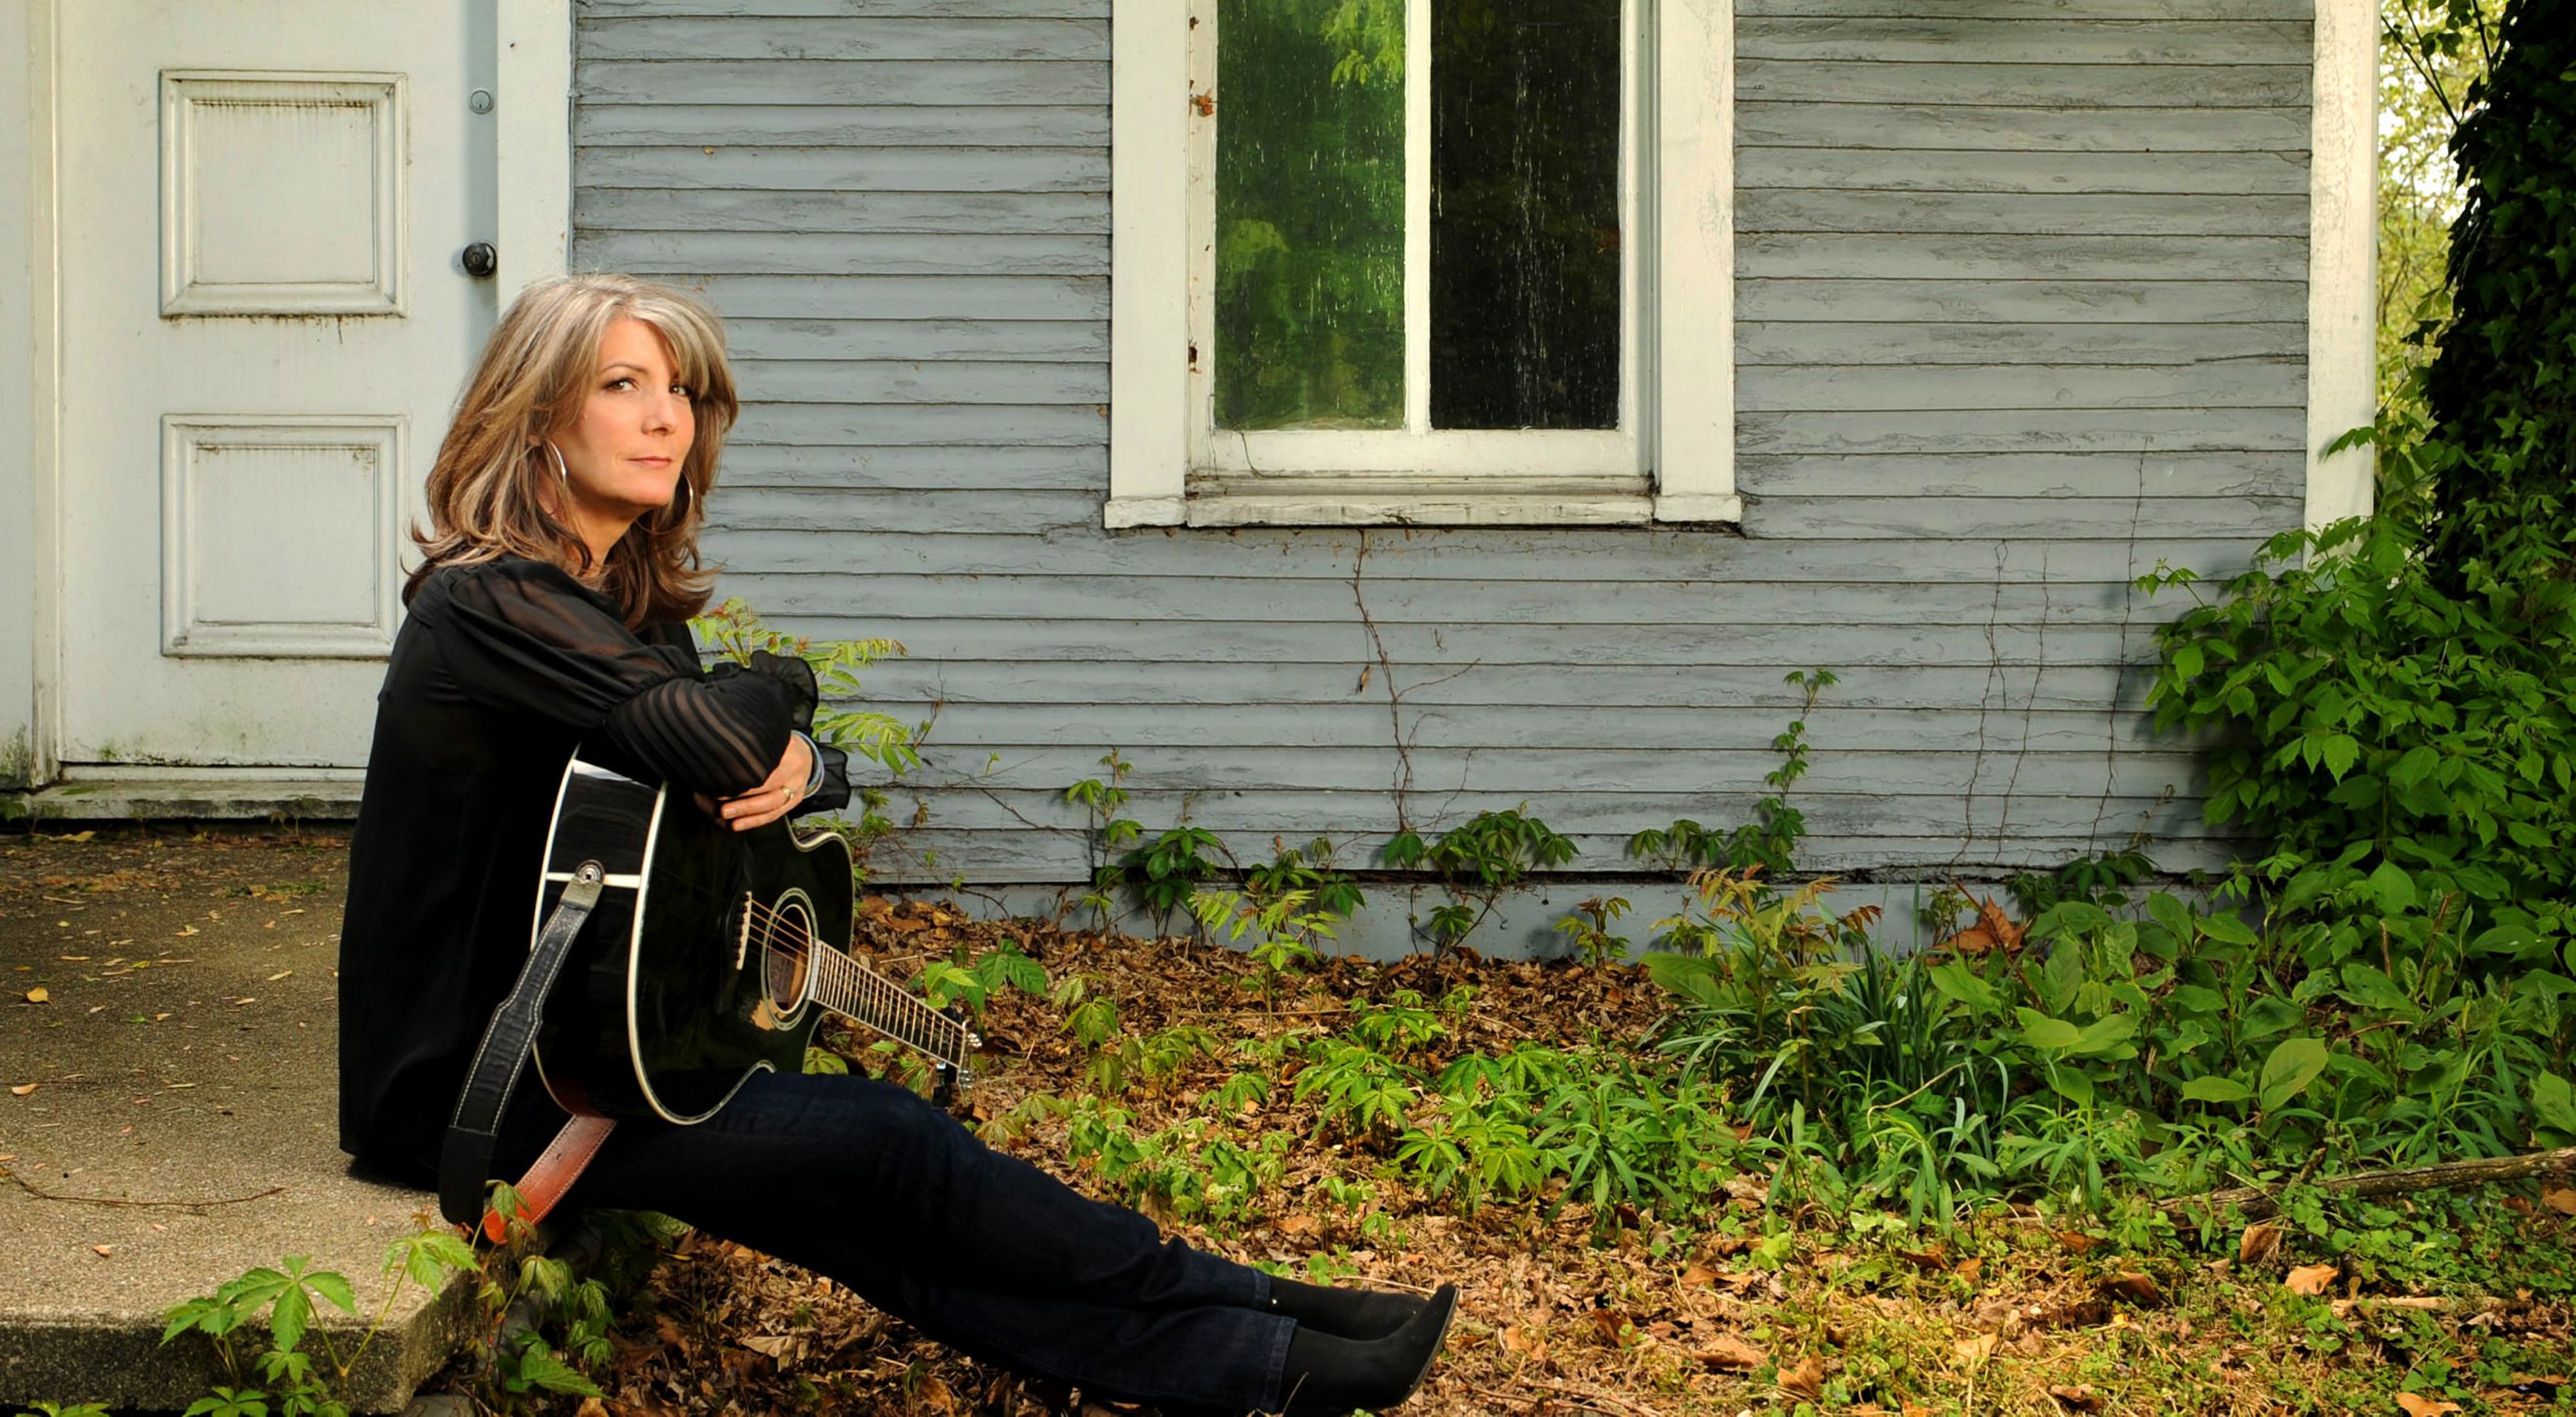 Kathy Mattea holding a guitar in her lap and sitting on a concrete walkway in front of an old house.